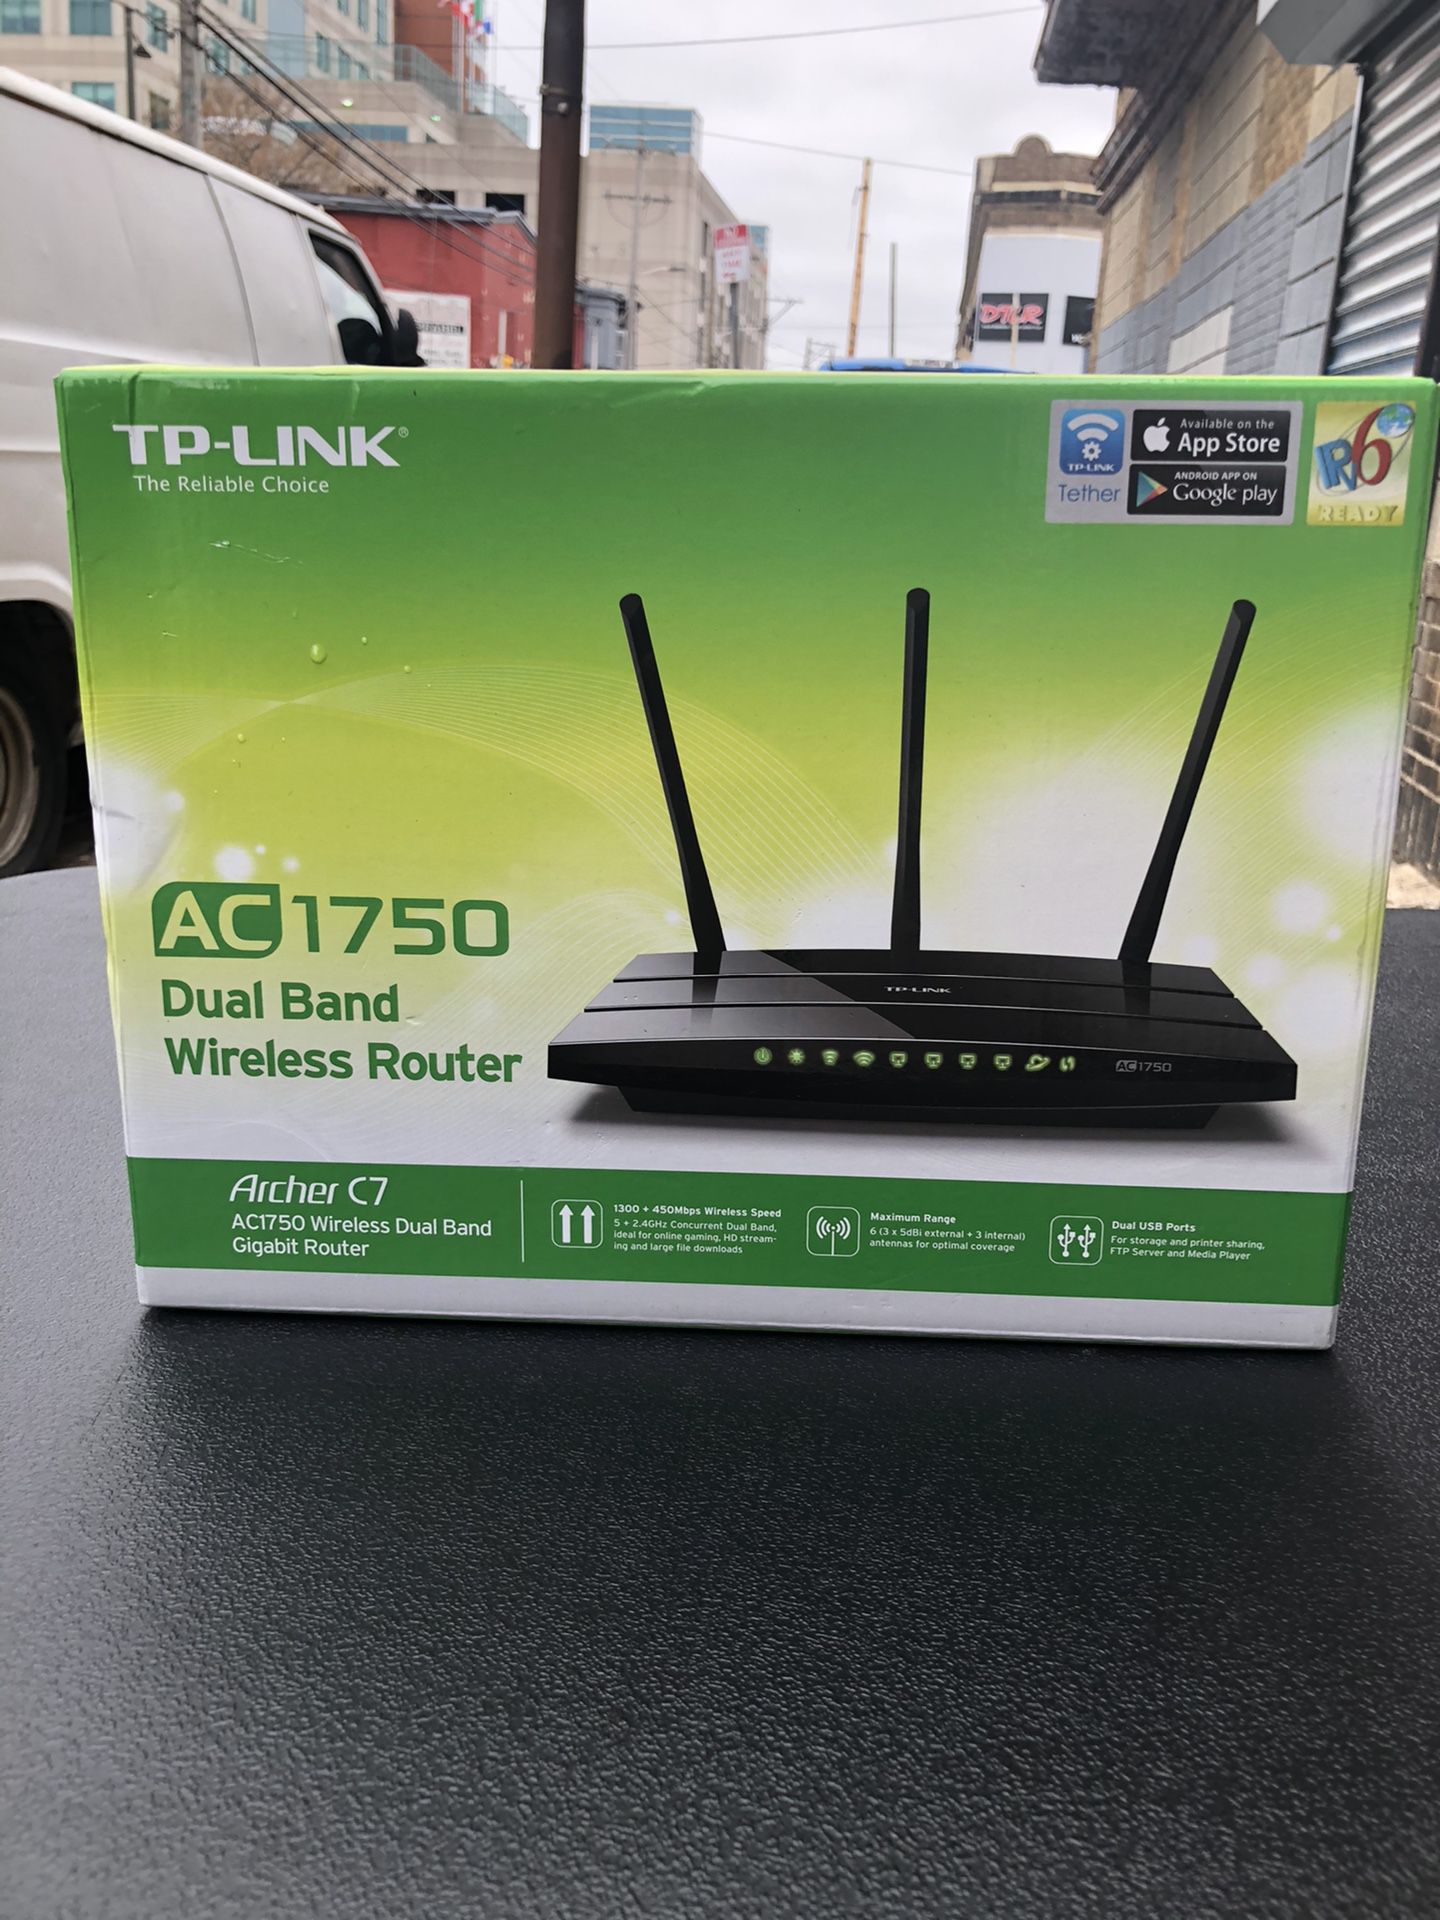 TP-Link AC 1750 Dual Band Wireless Router